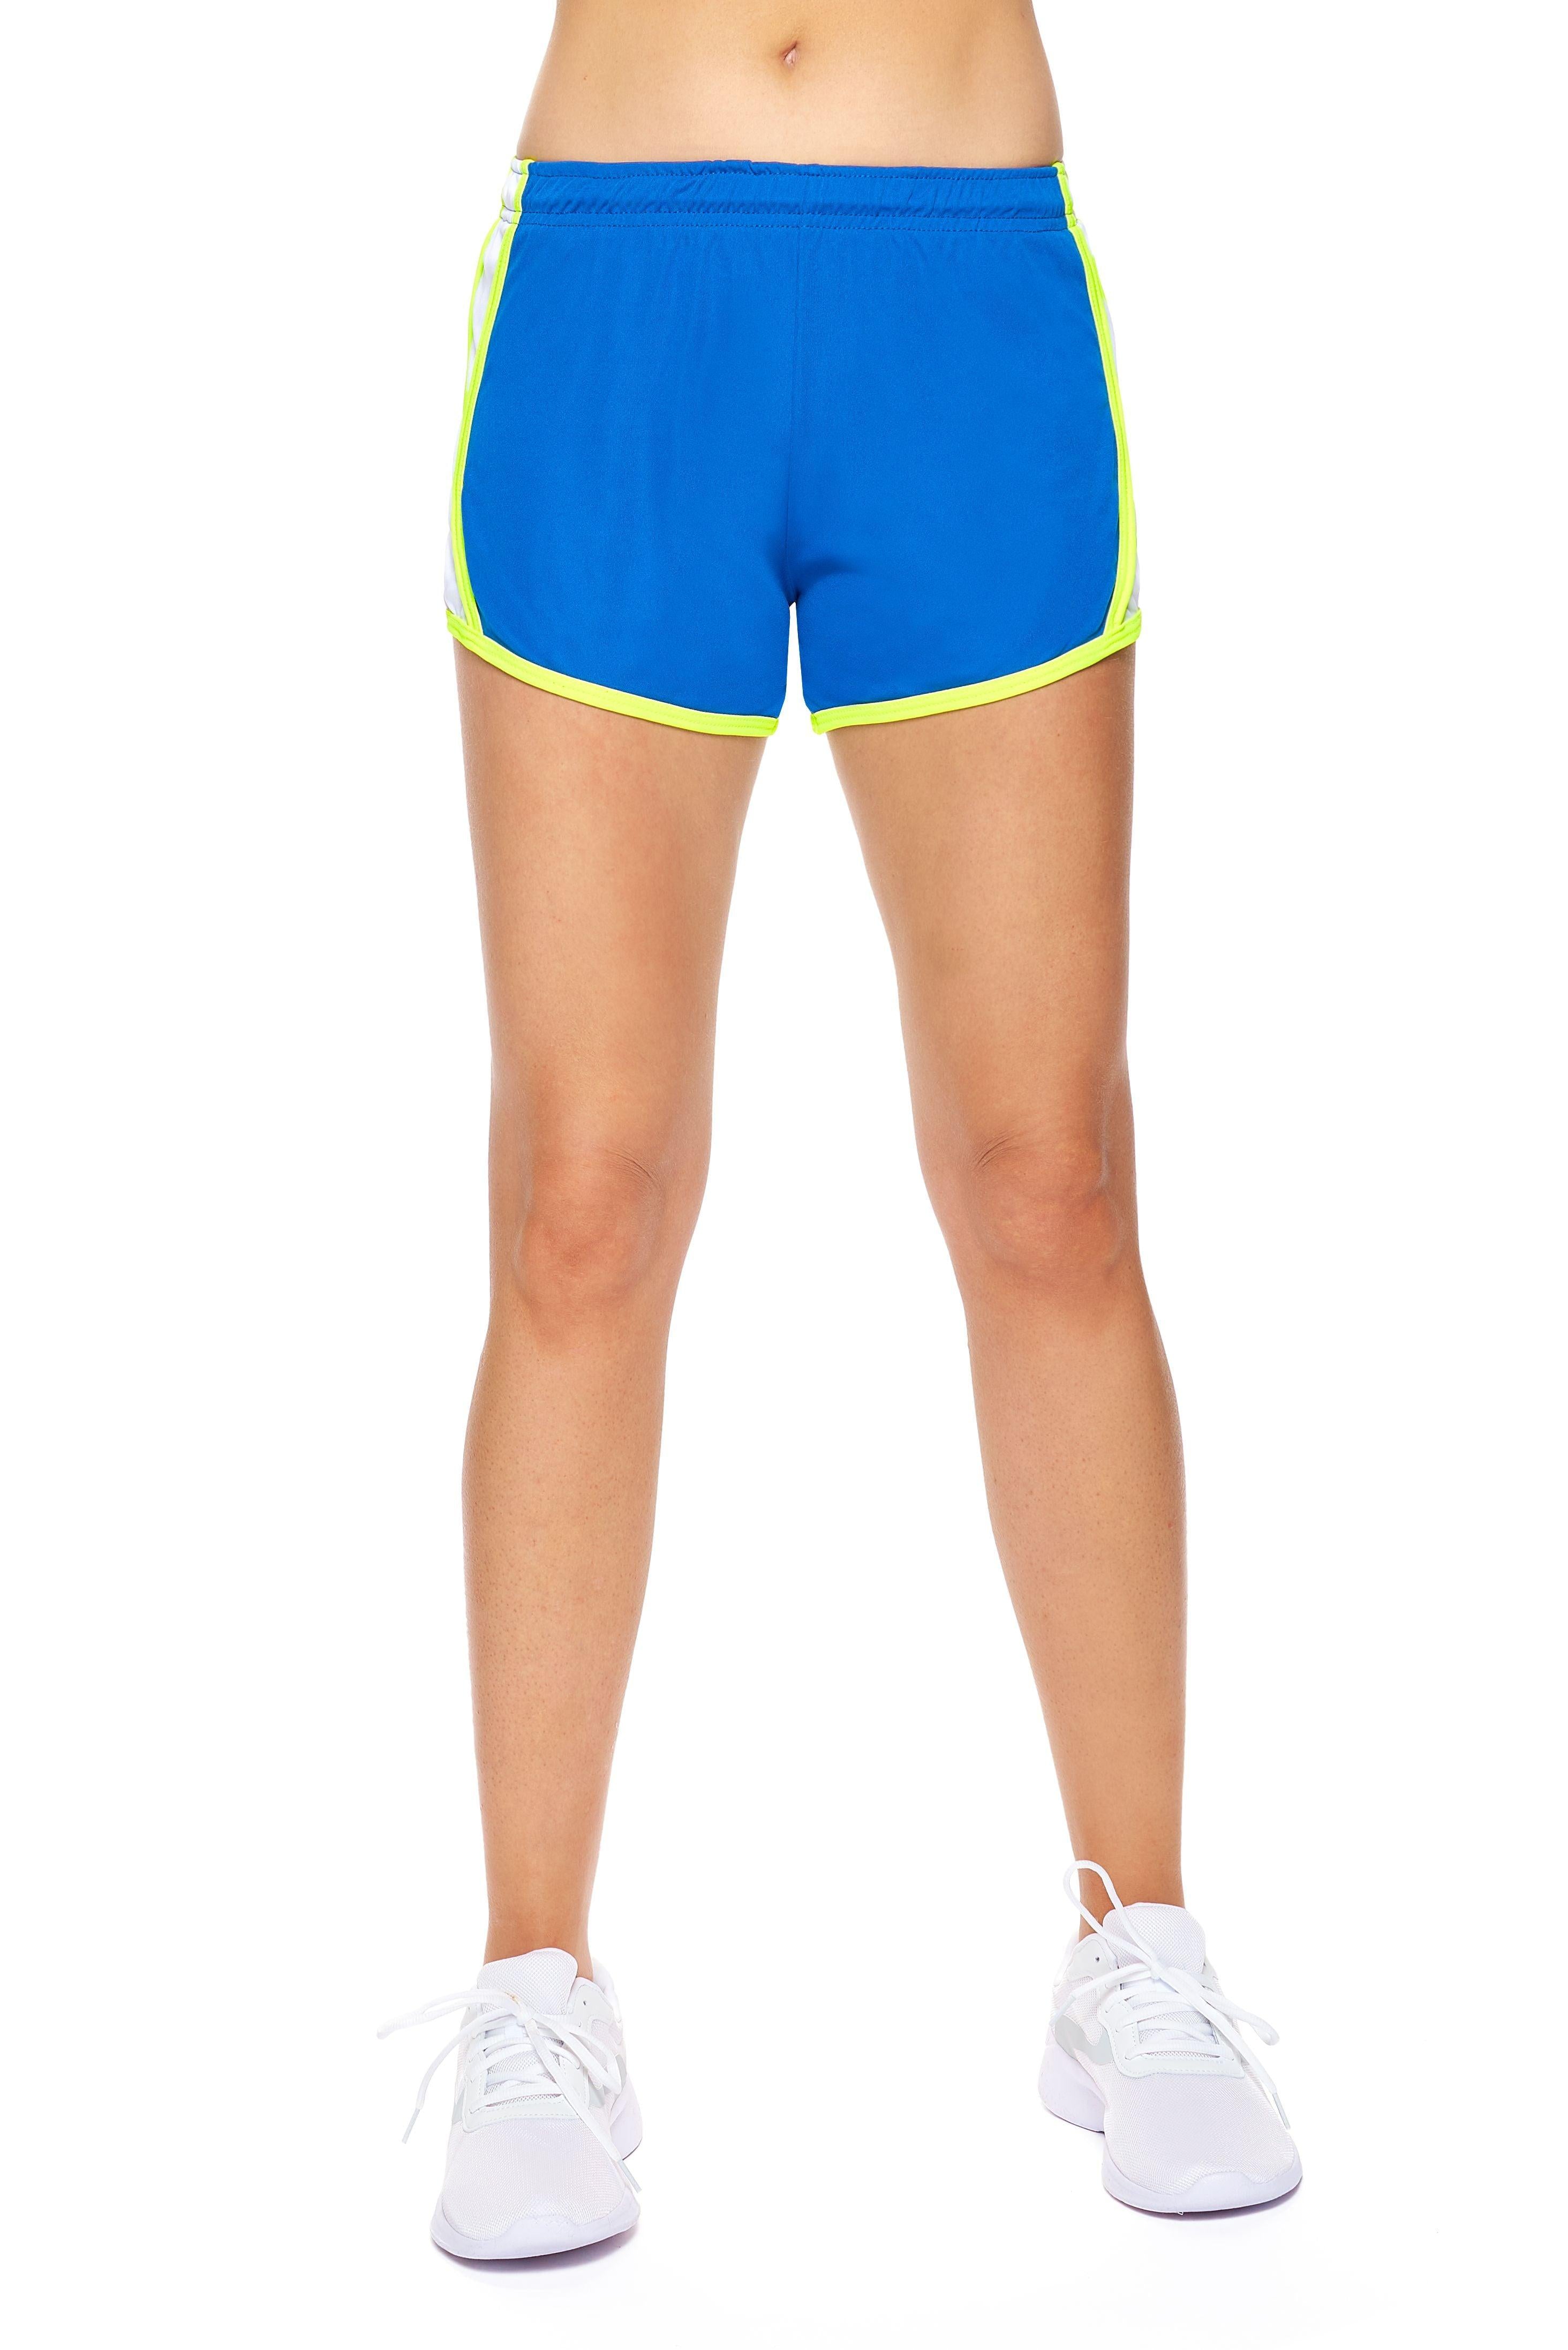 Expert Brand Wholesale Women's DriMax Go Active Shorts Made in USA AI1046 royal blue image 2#royal